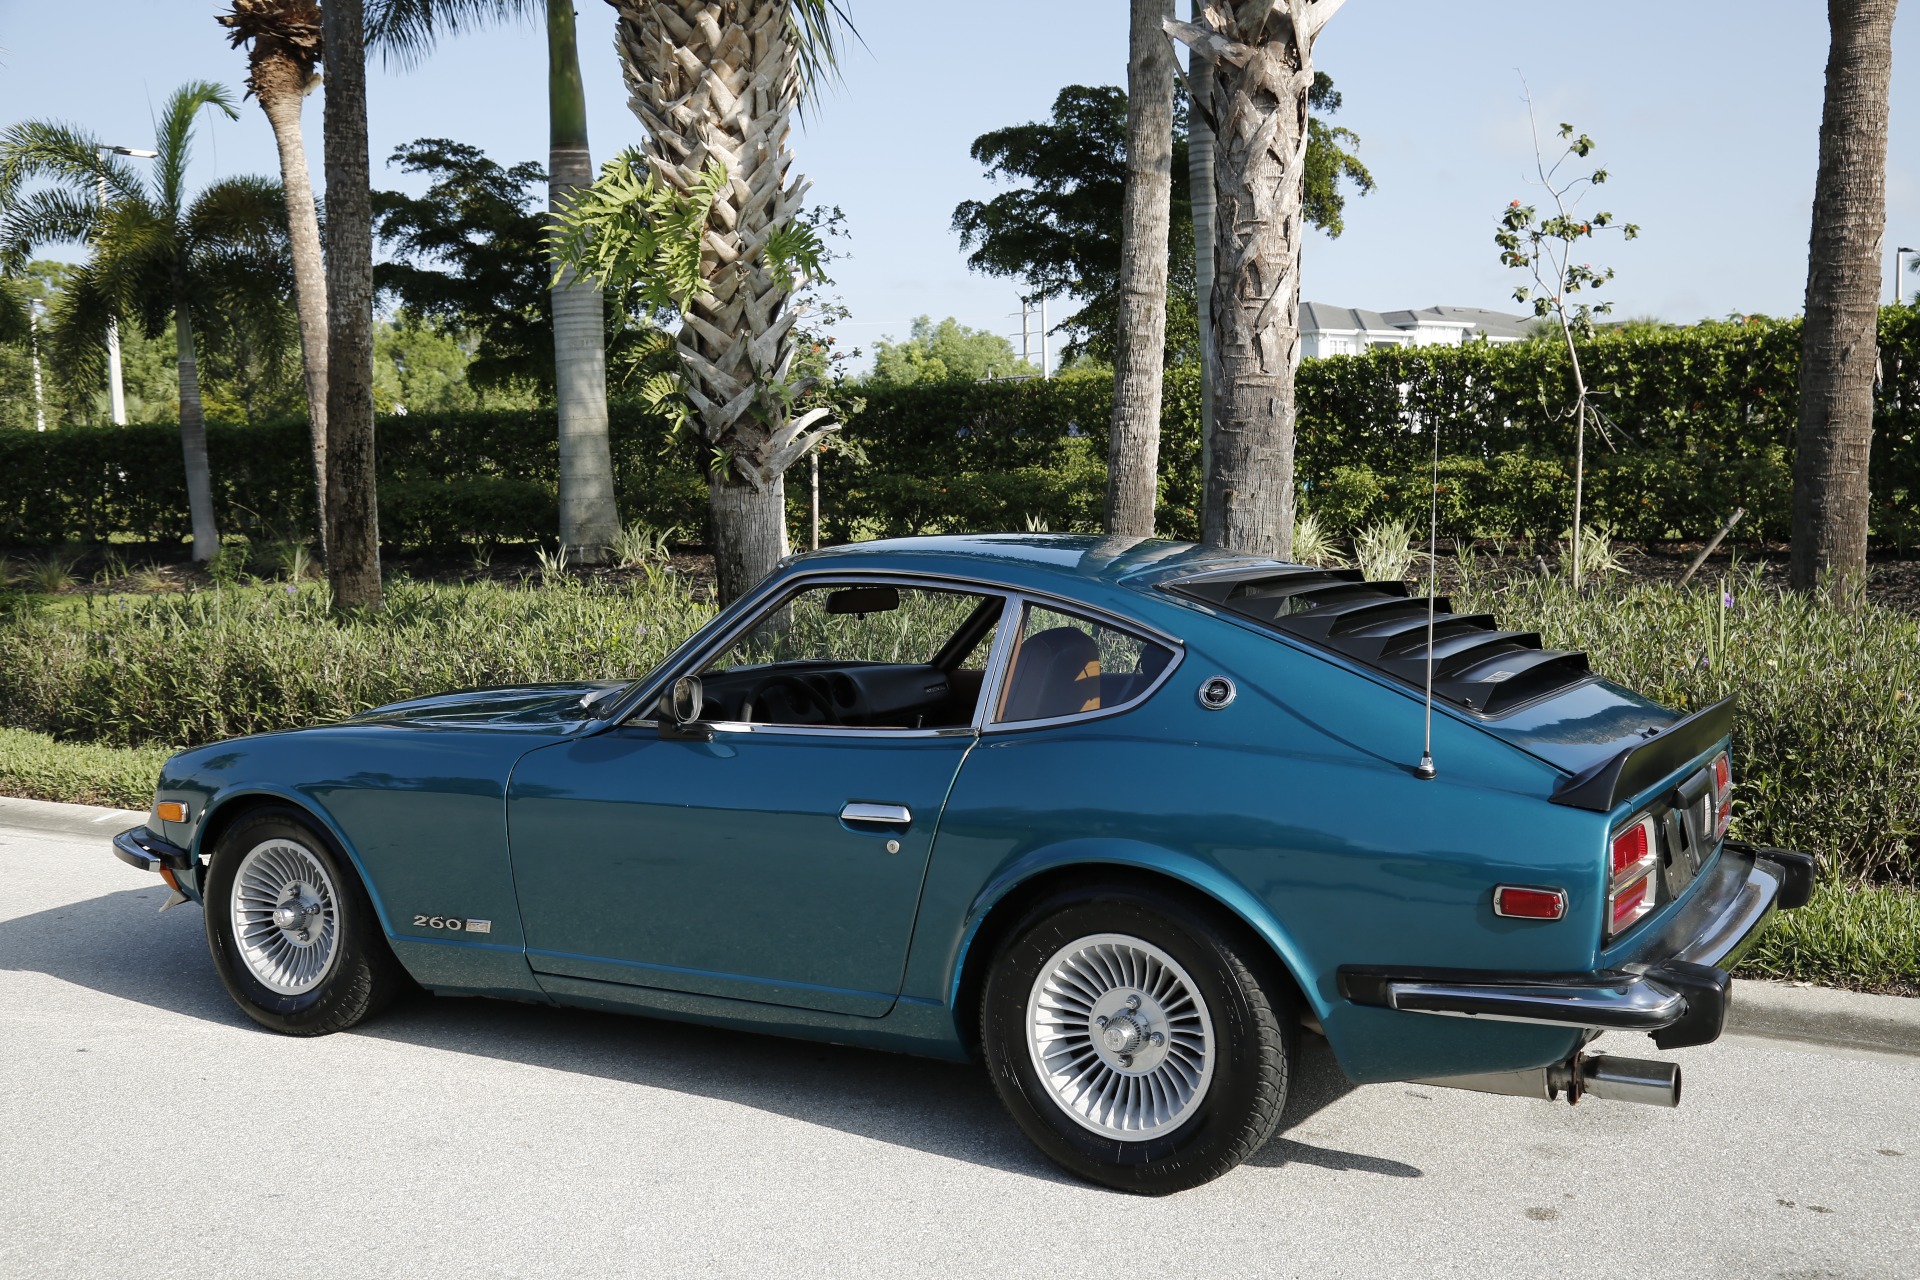 Used 1974 Datsun 260Z 260Z for sale Sold at Muscle Cars for Sale Inc. in Fort Myers FL 33912 4